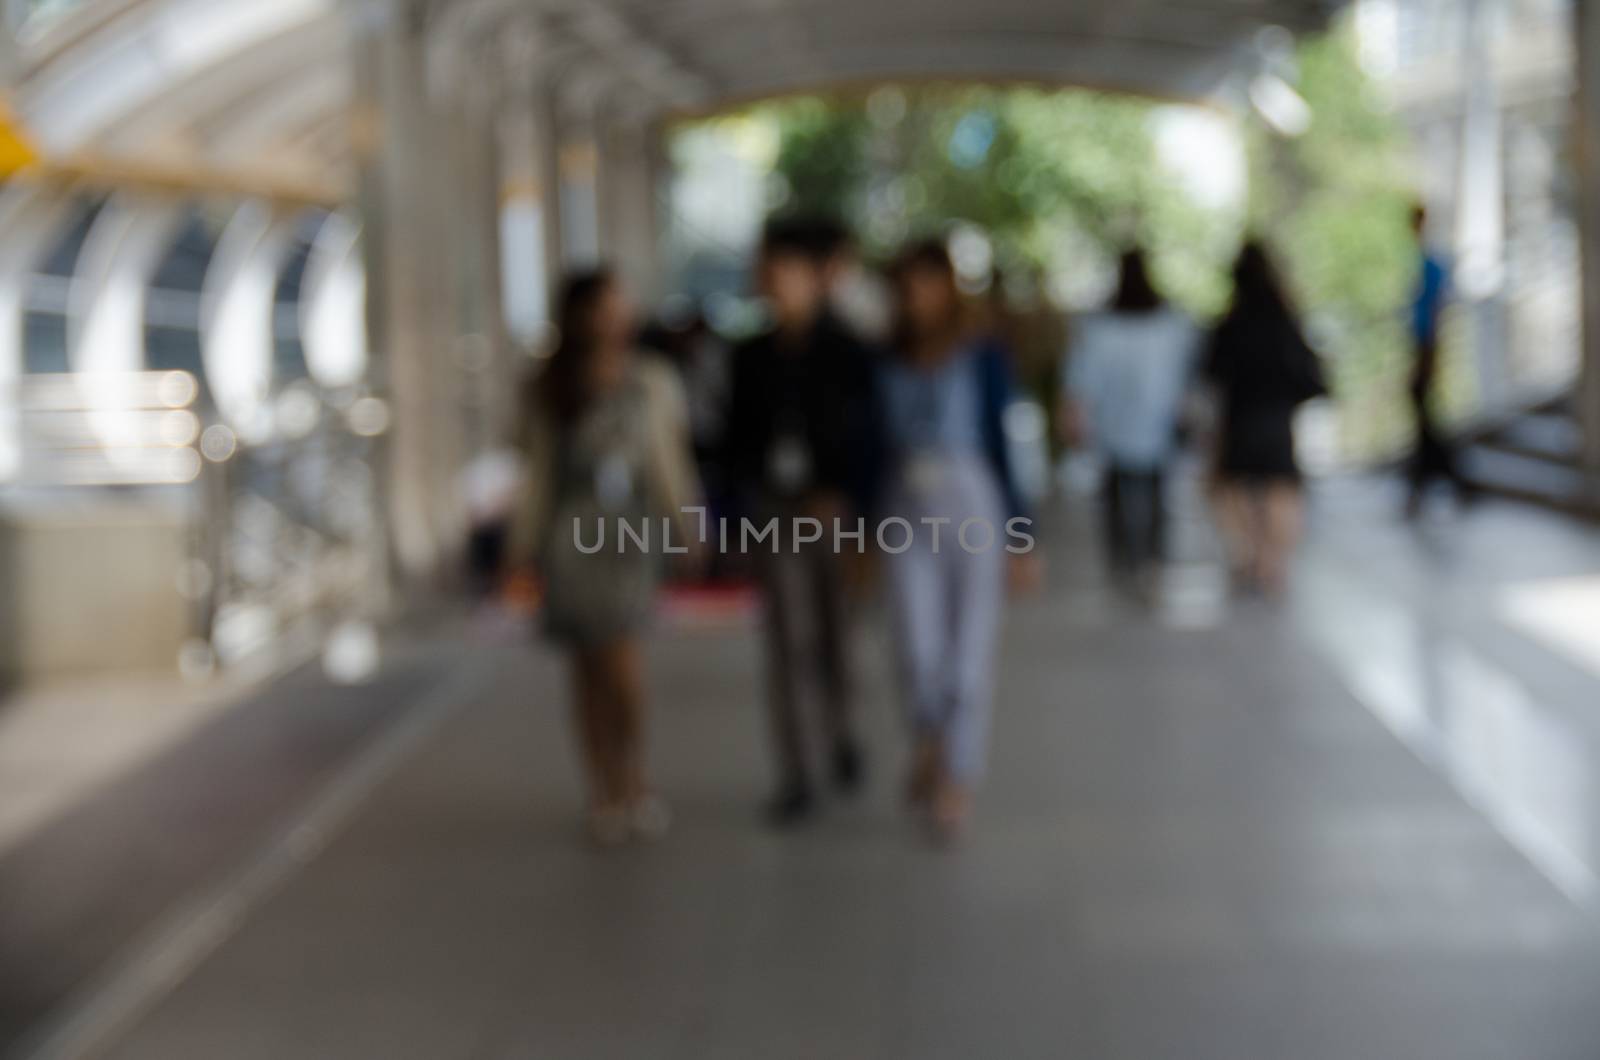 City commuters. Abstract blurred image of a city street scene.
Bildnummer: 272788214